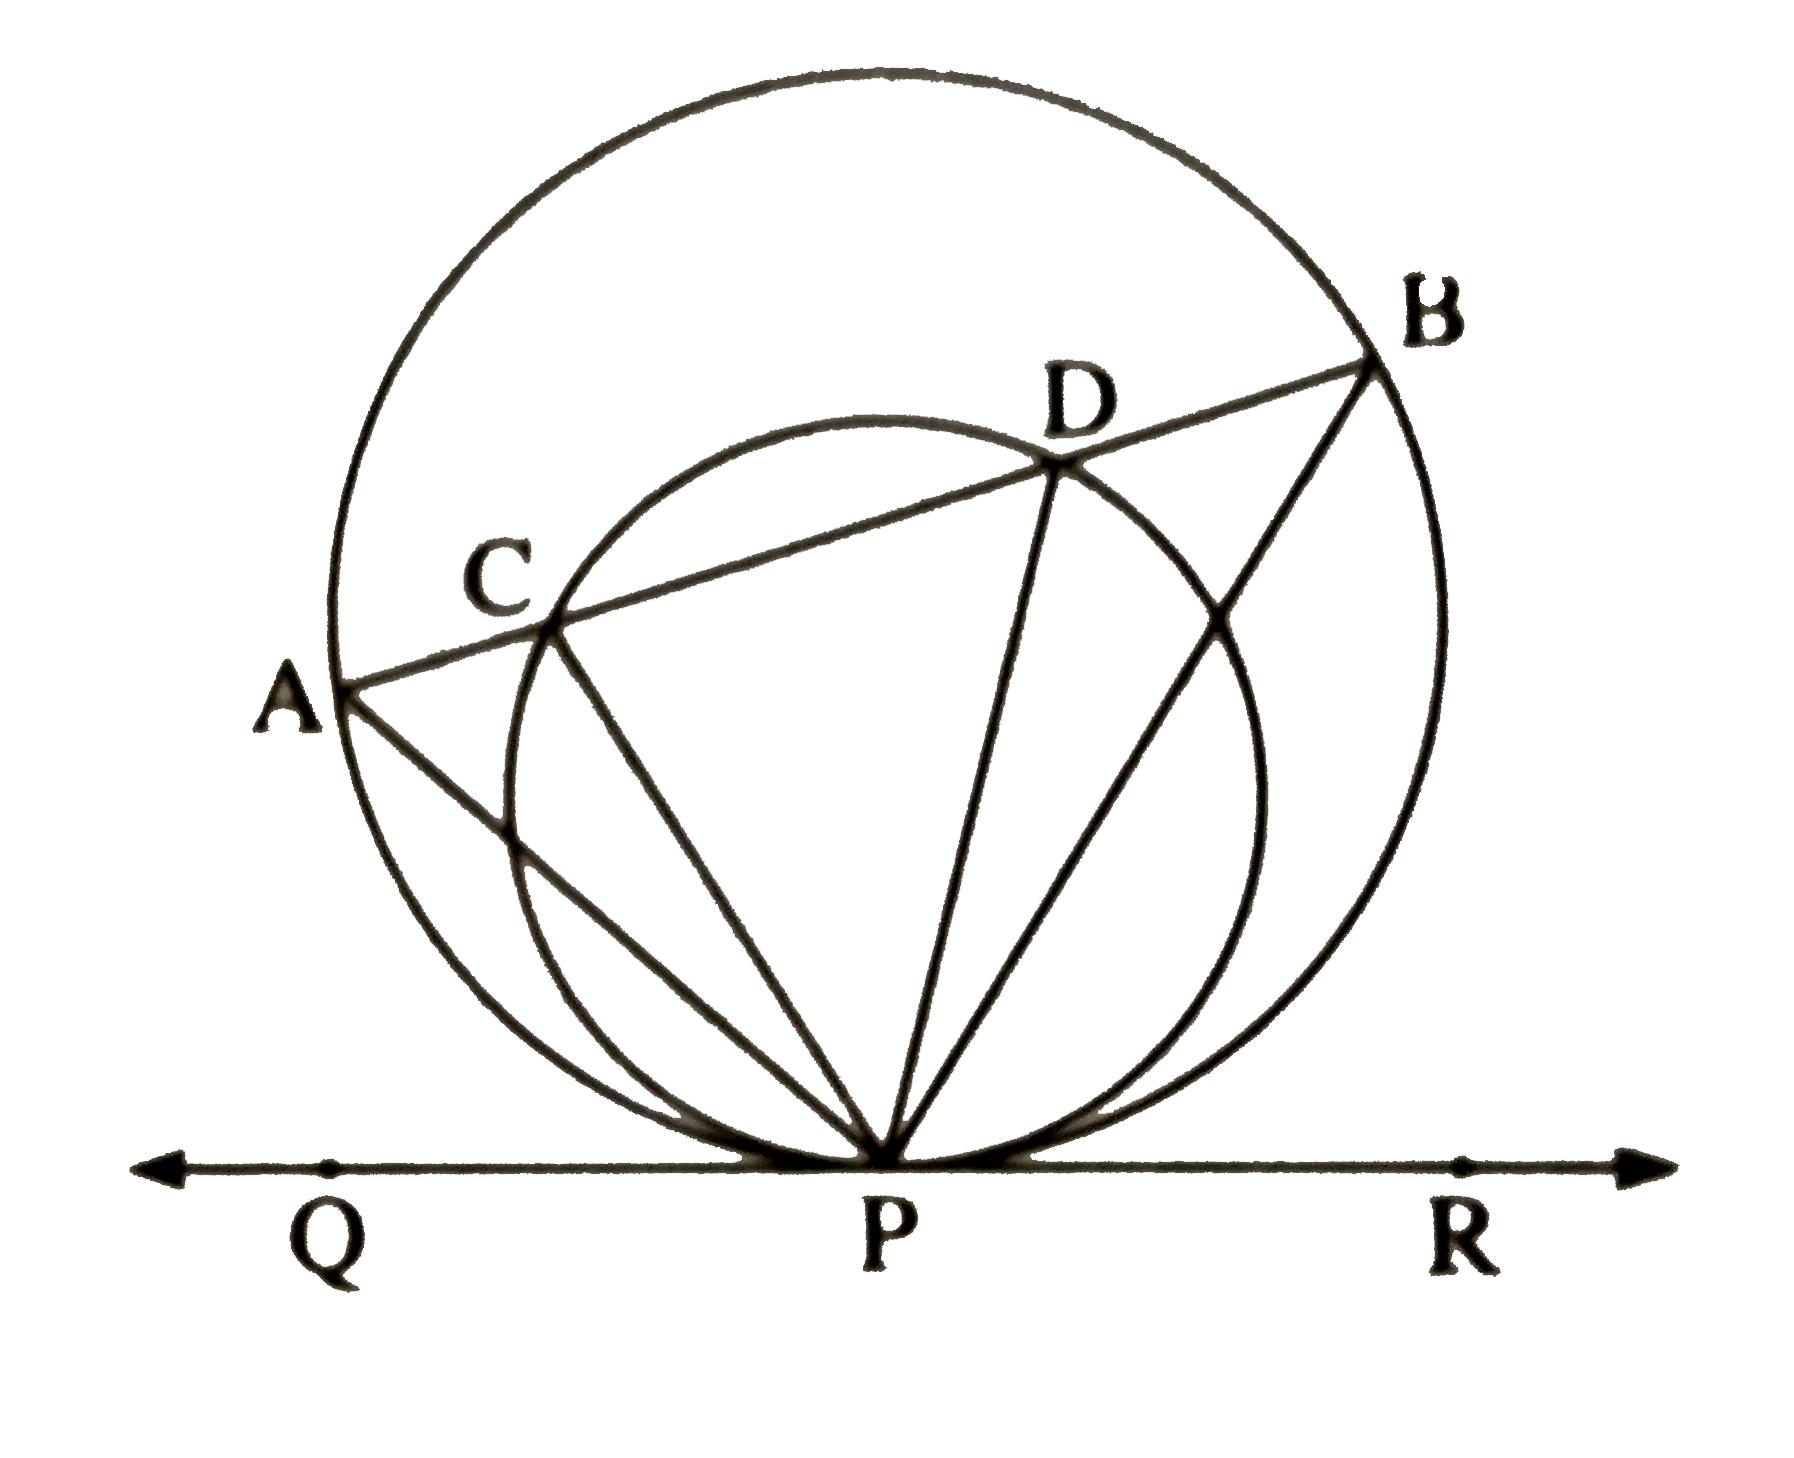 In the figure, two circles touch internally at point P. chord AB of the larger circle intersects the smaller circle in C and D. Prove /CPA cong /DPB.